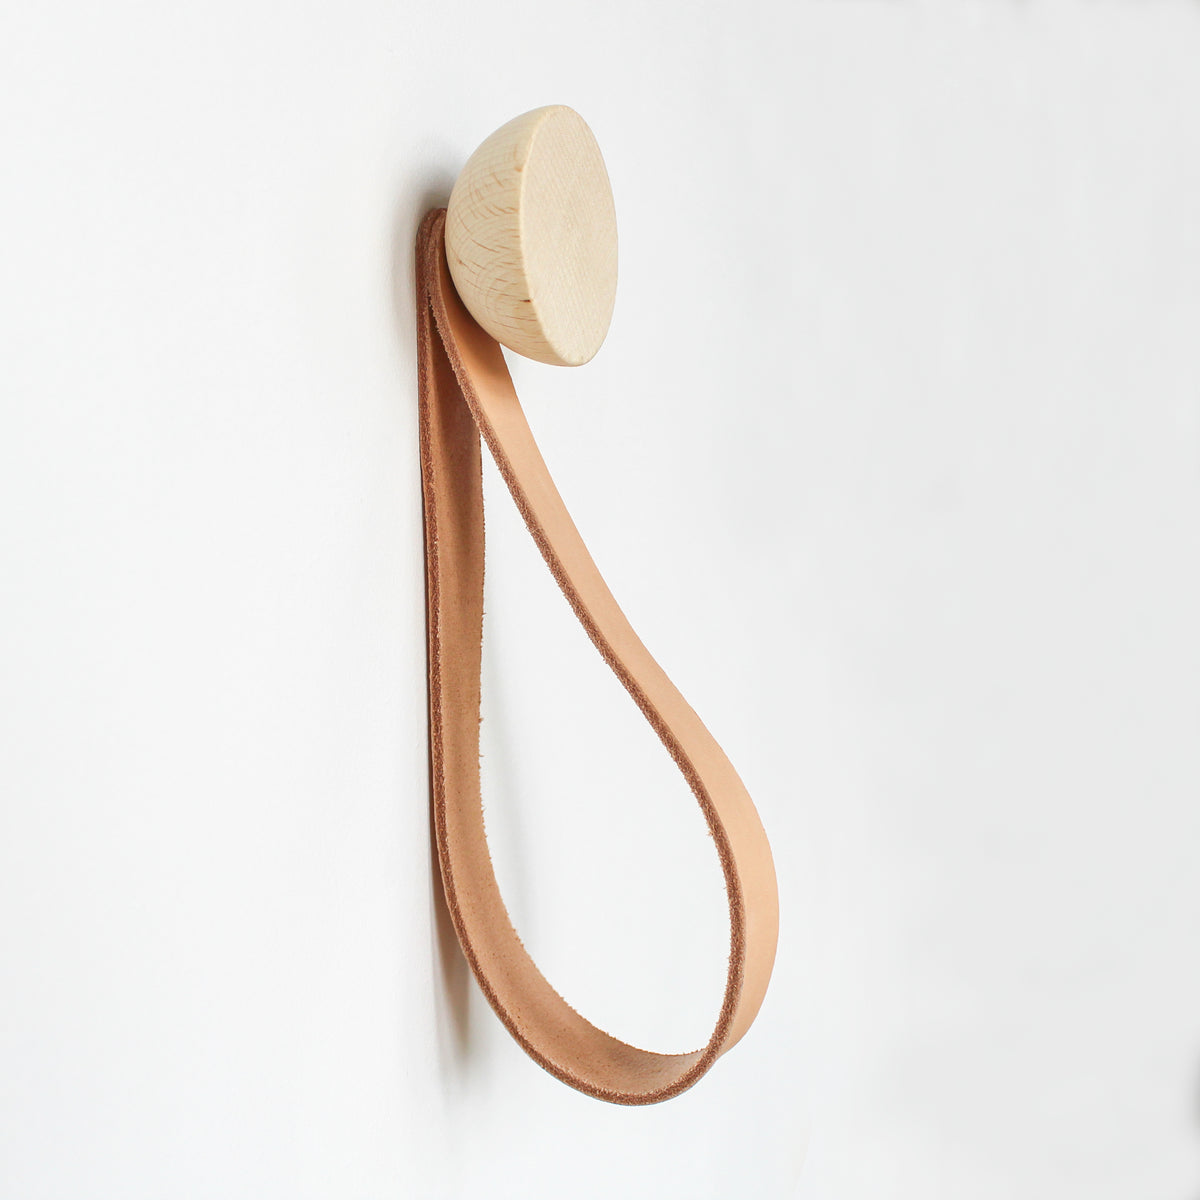 Large Beech Wood Wall Mounted Coat Hook With Leather Strap - Holistic Habitat 